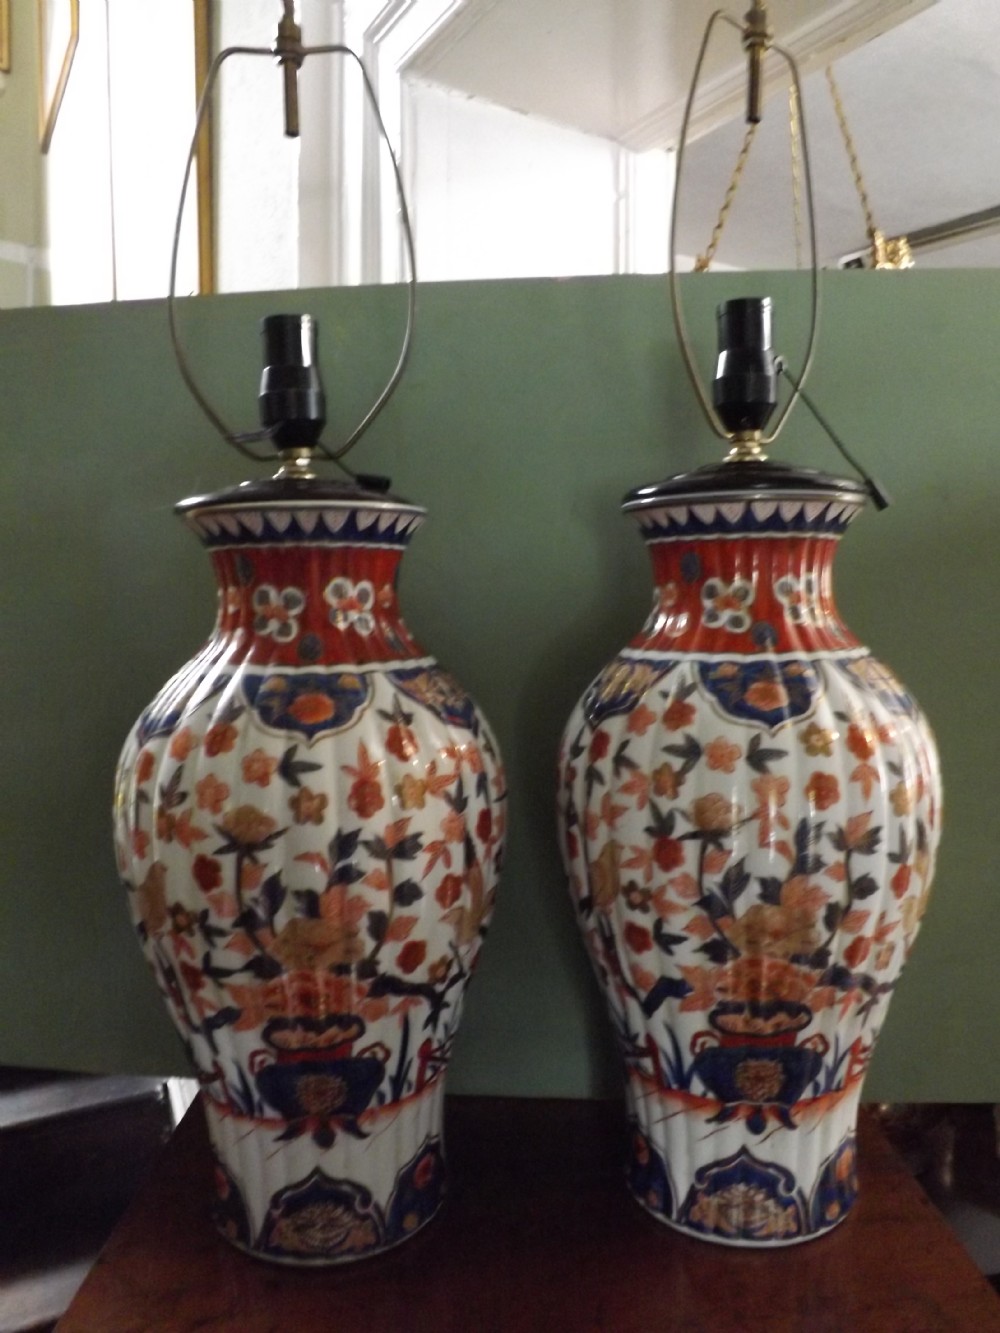 pair late c19th japanese imari porcelain vases now fitted with lamp conversions